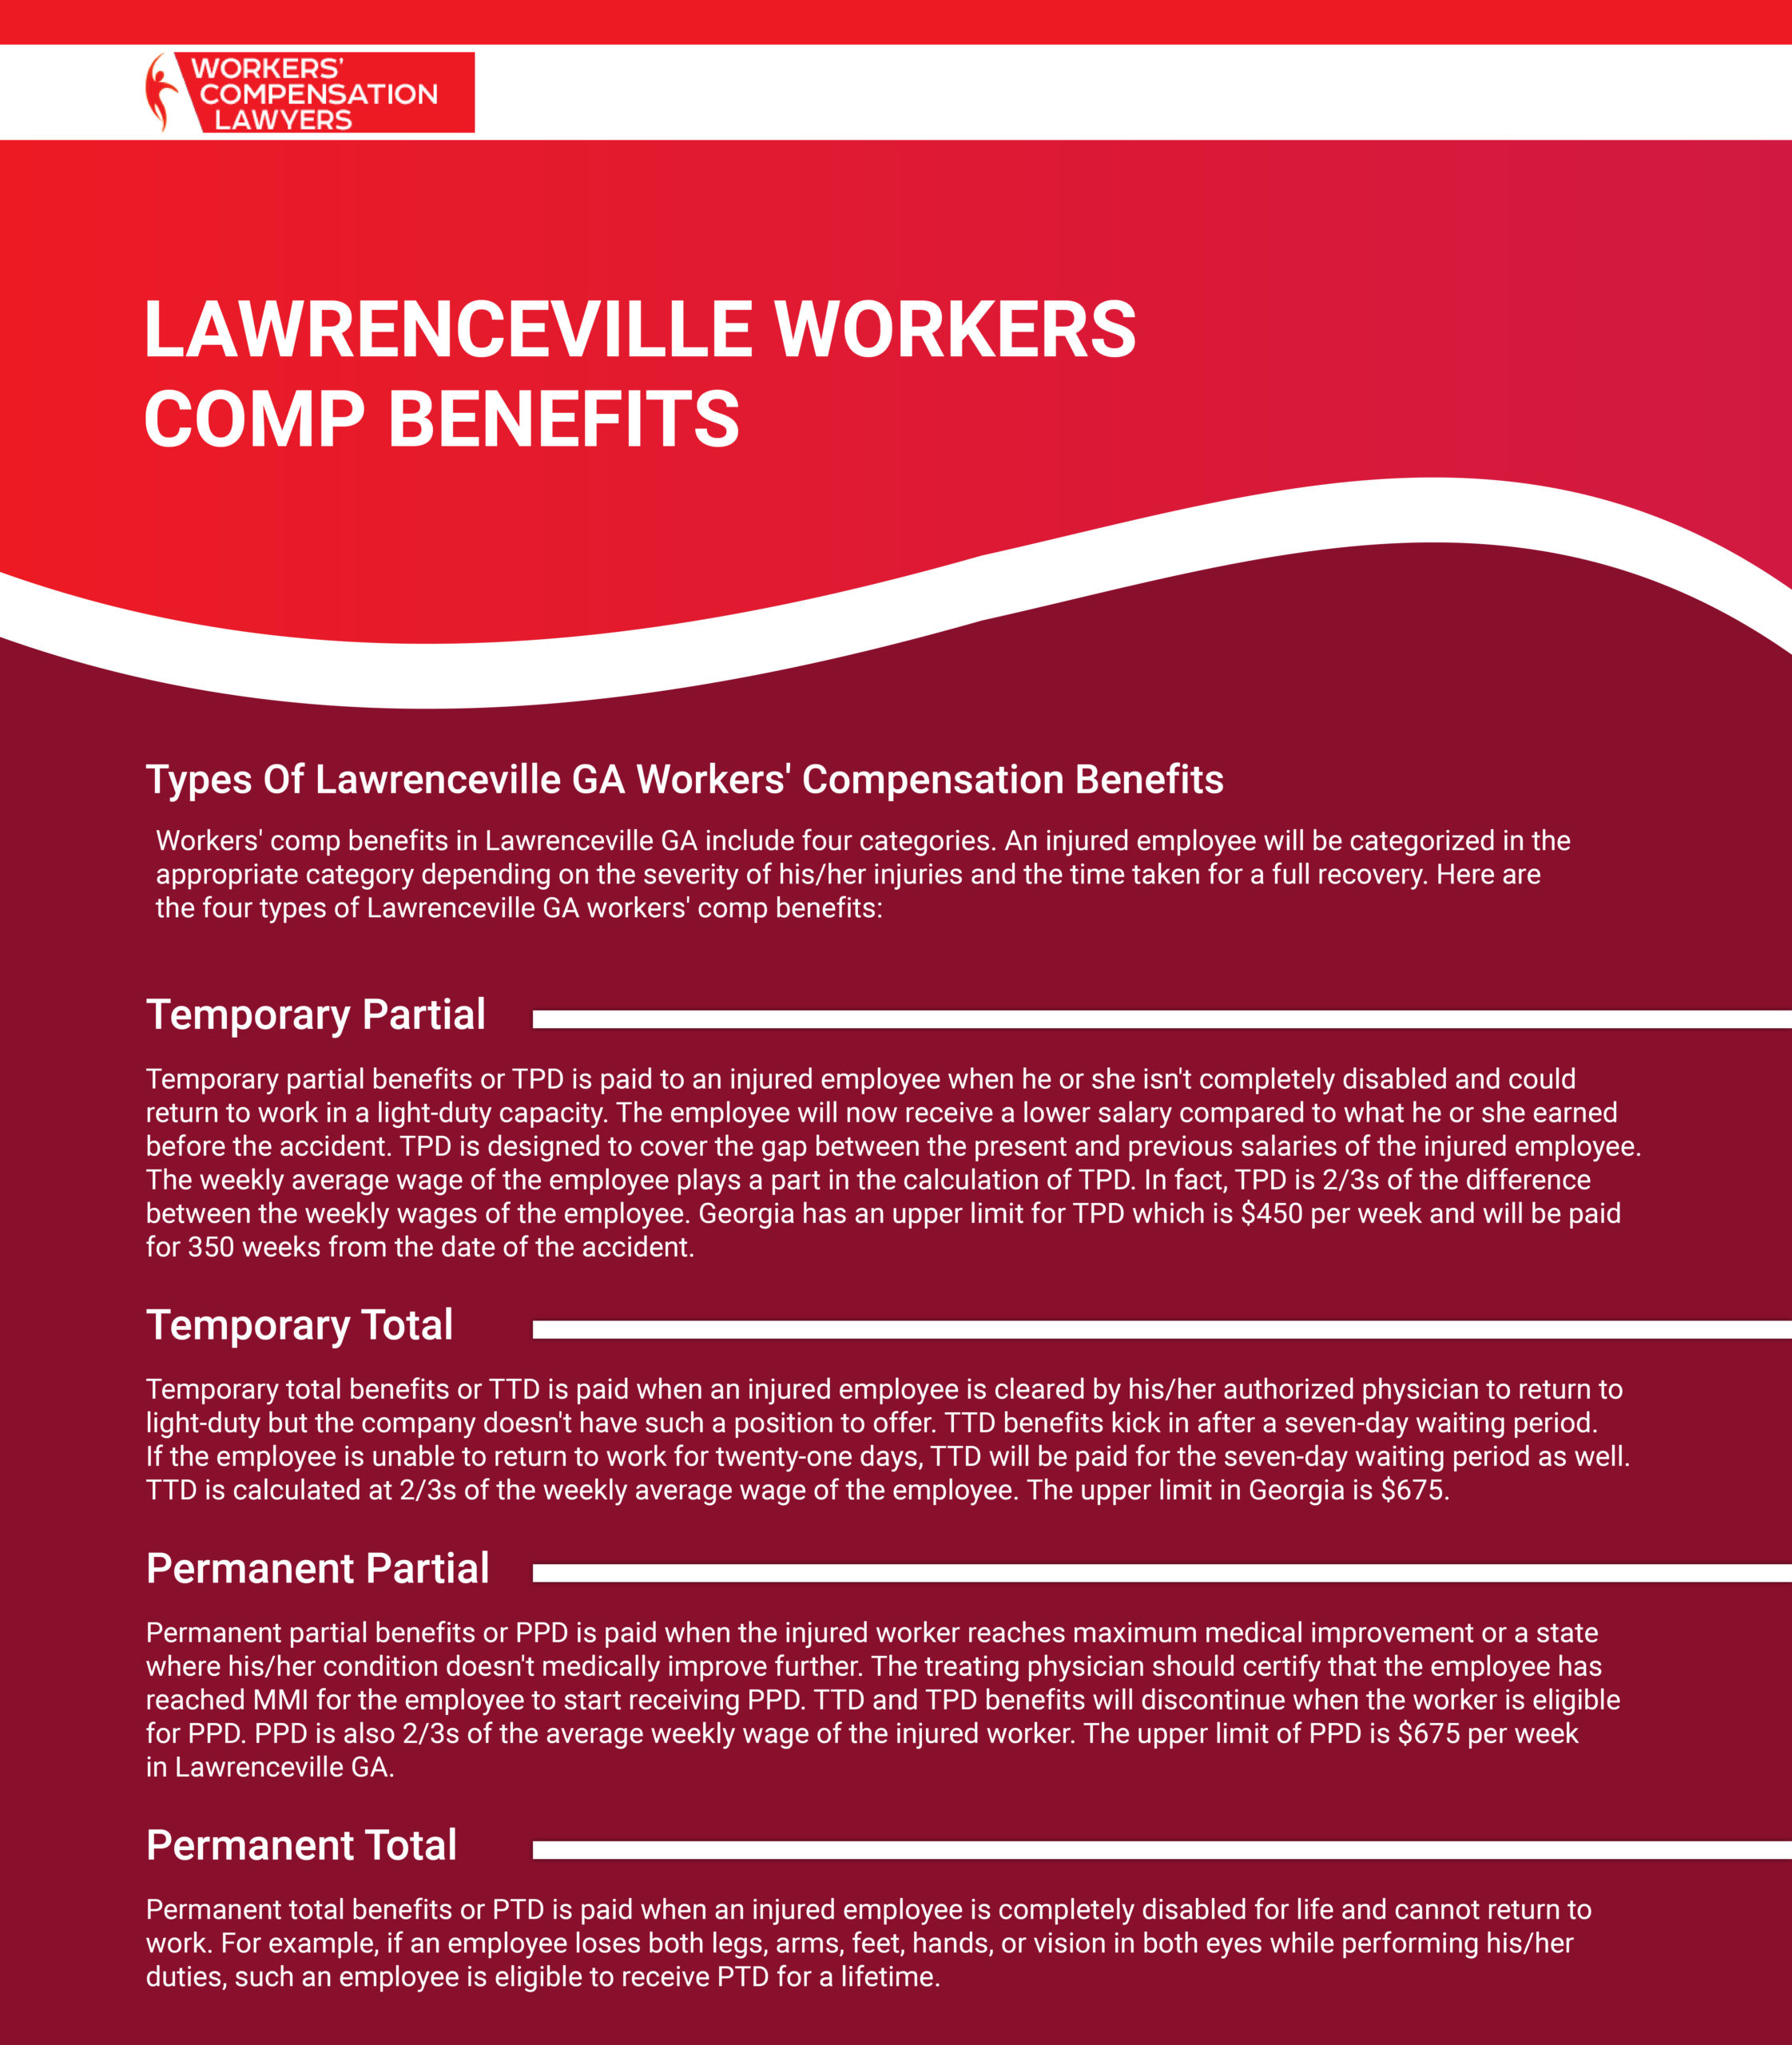 Lawrenceville Workers Compensation Benefits Infographic